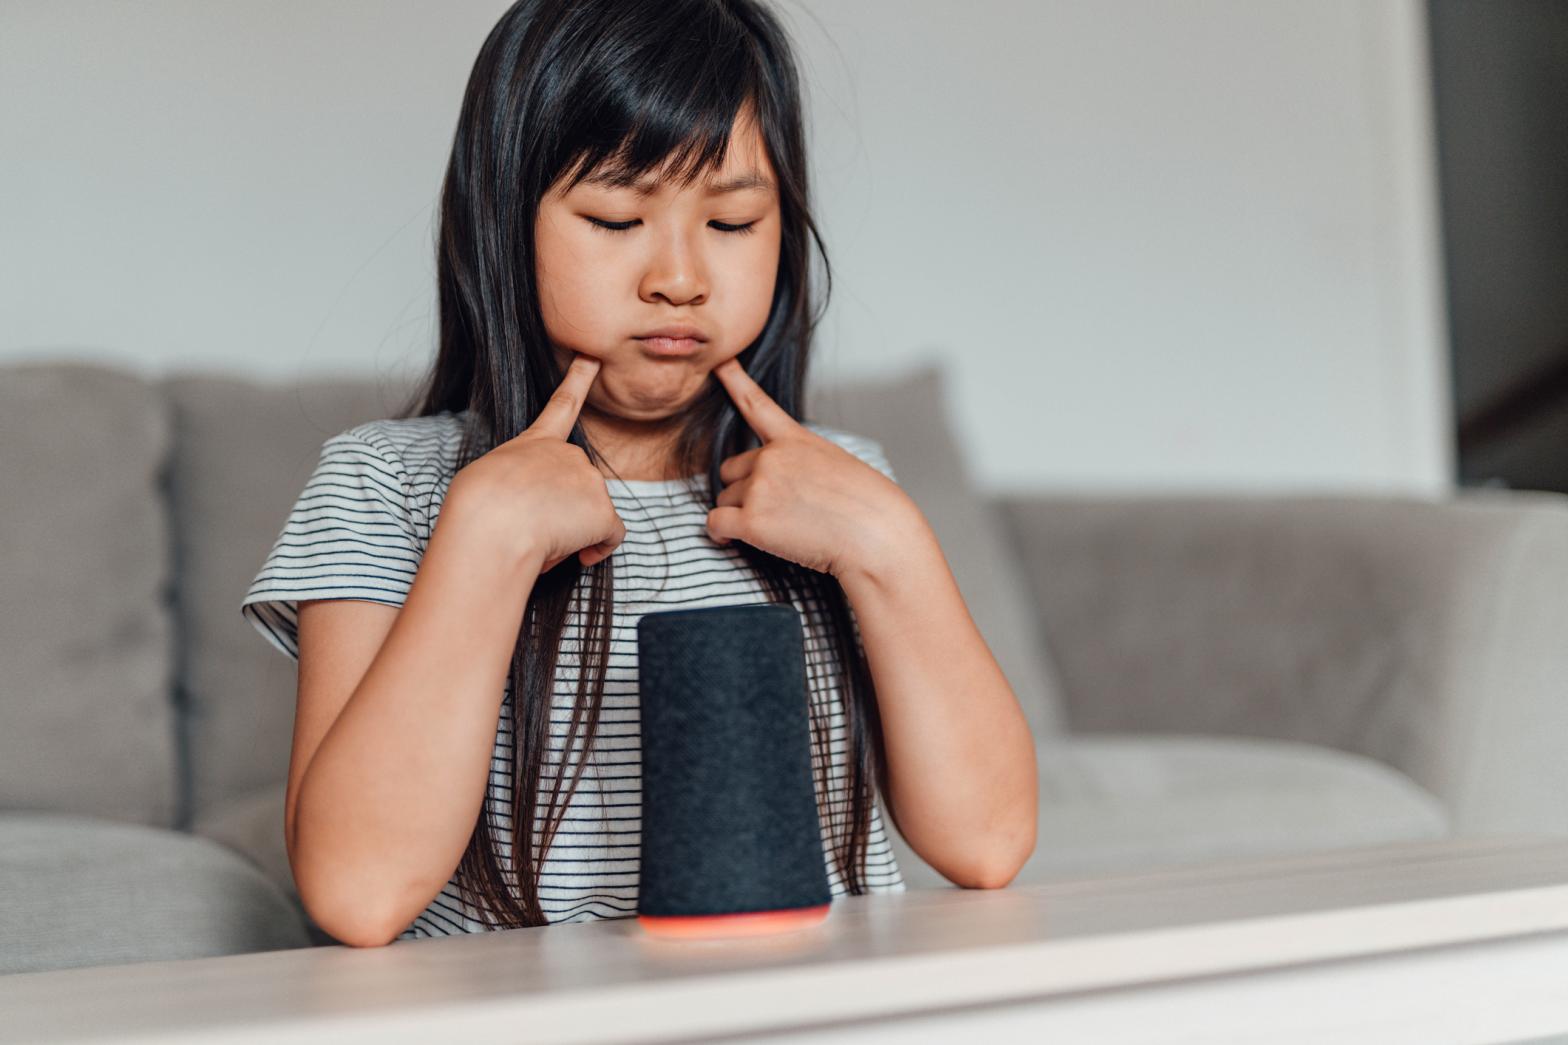 A child plays with a smart toy gift that could spy on her